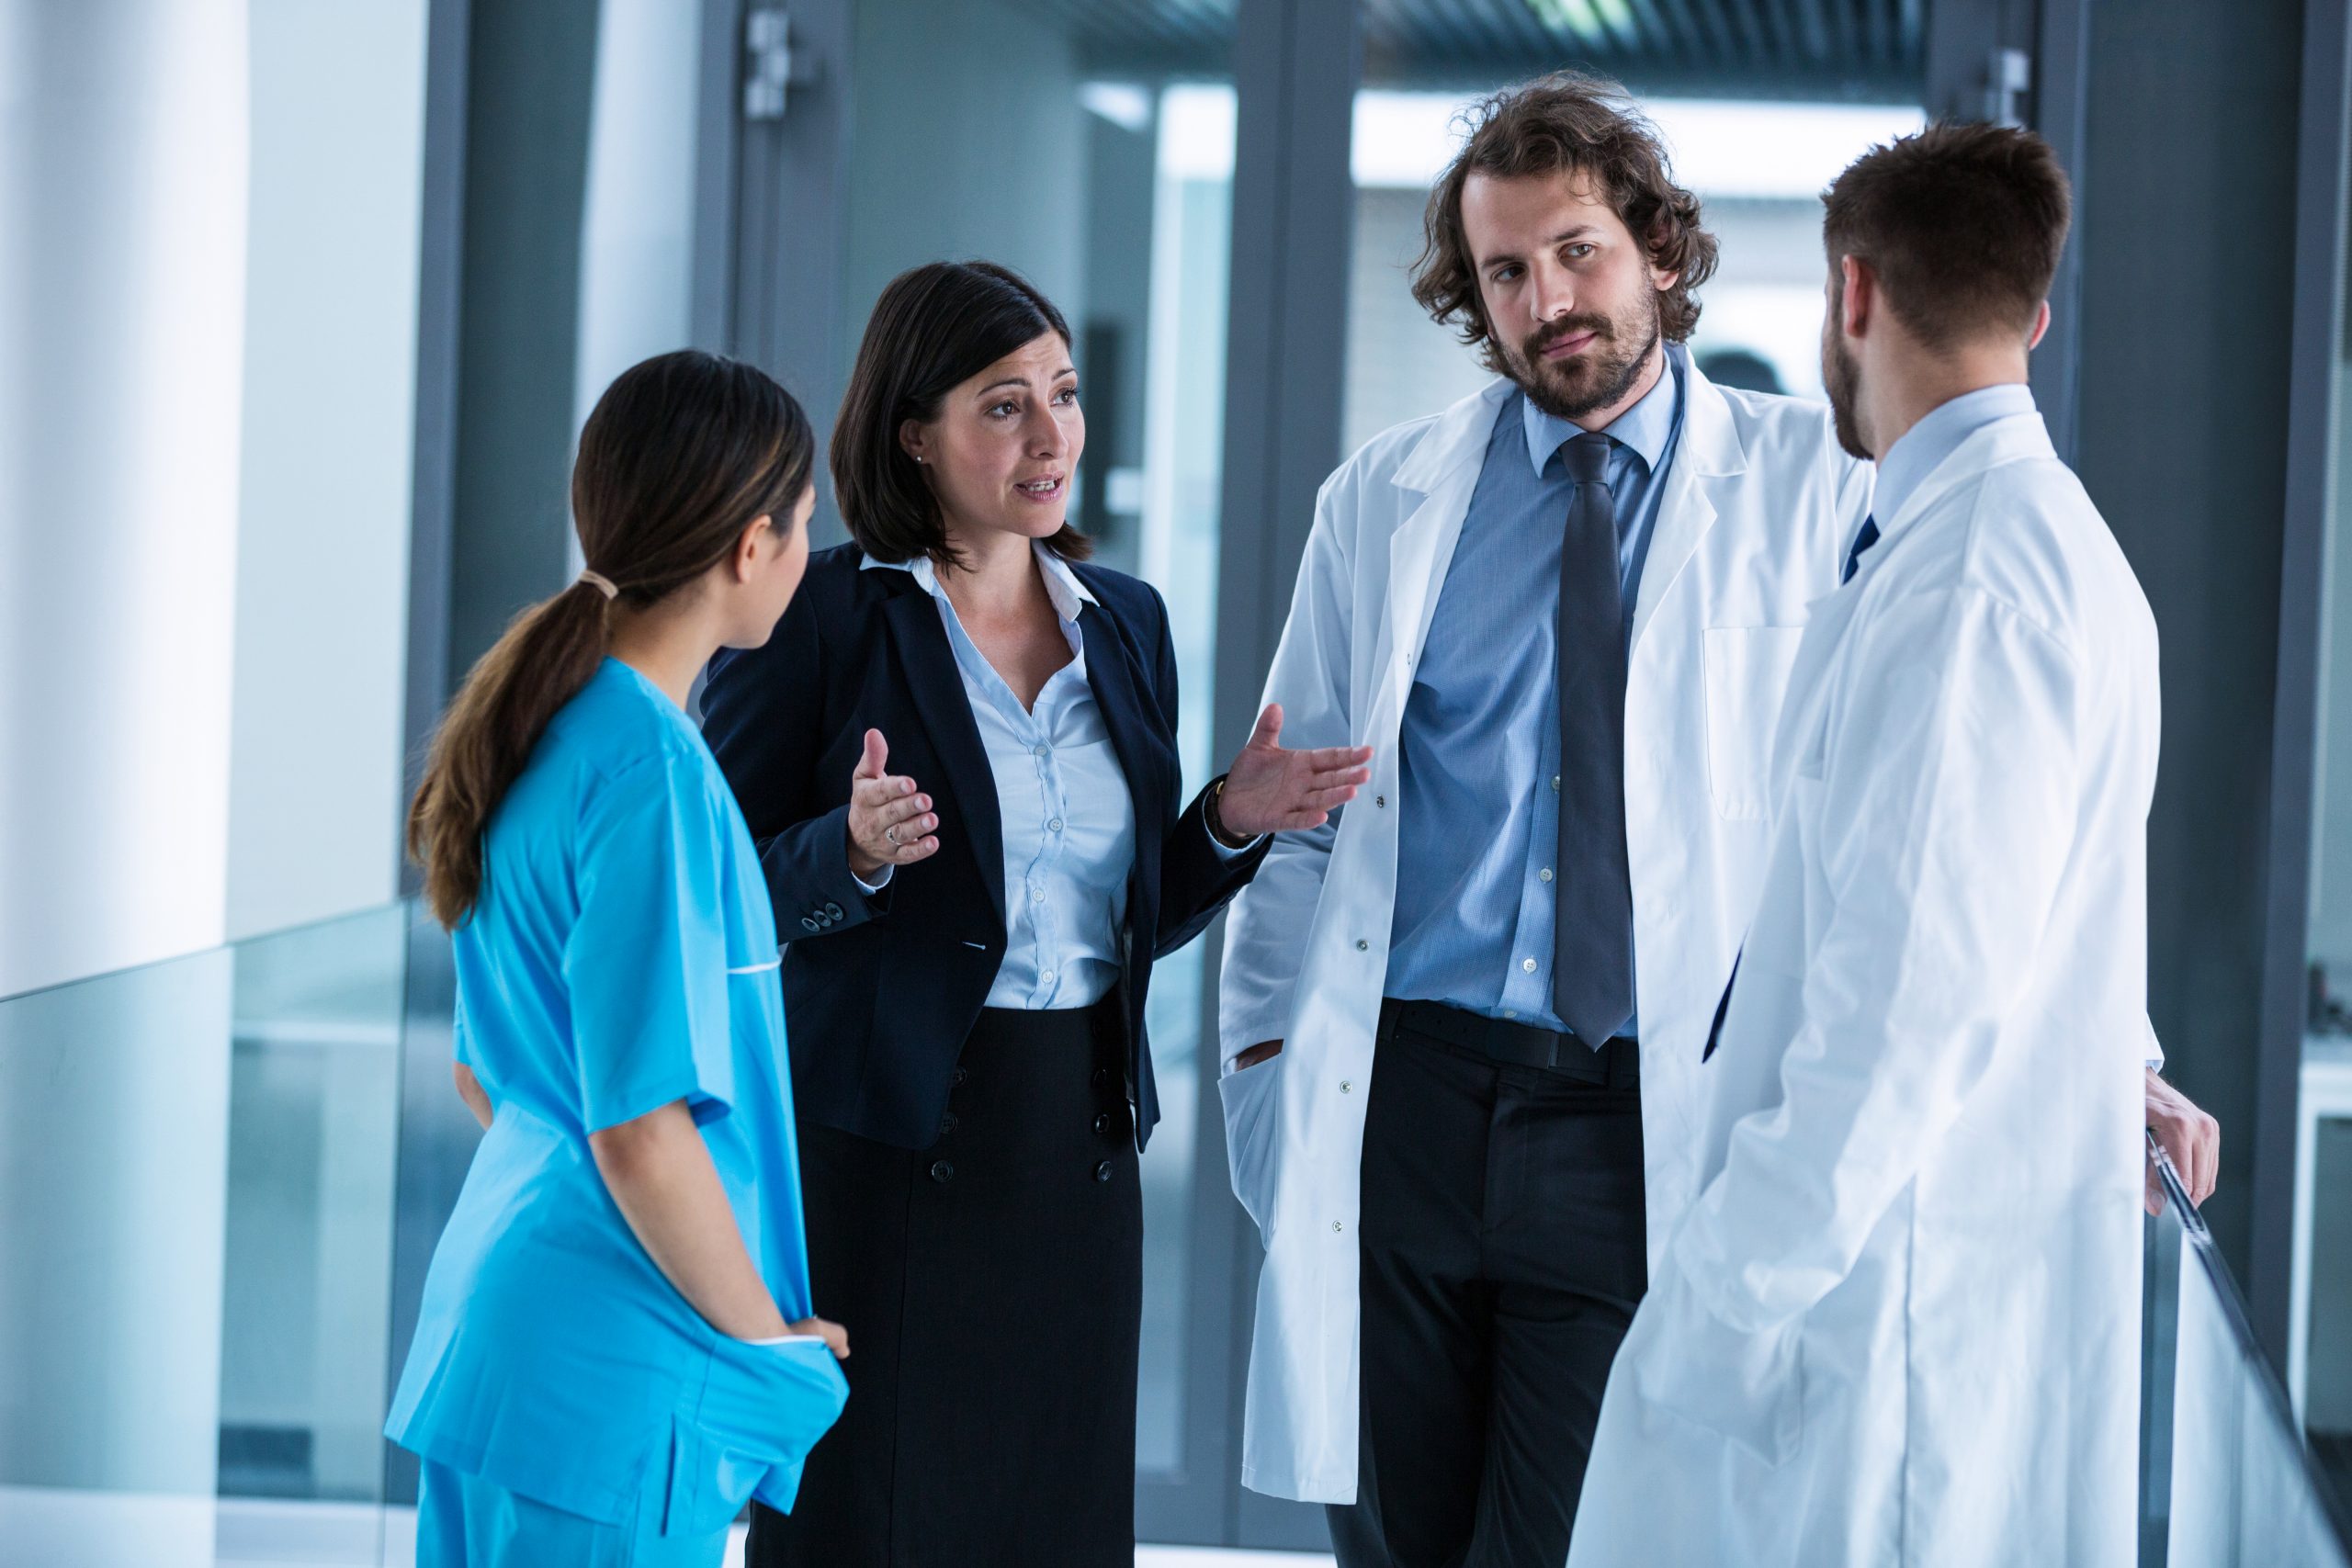 Businesswoman interacting with doctors